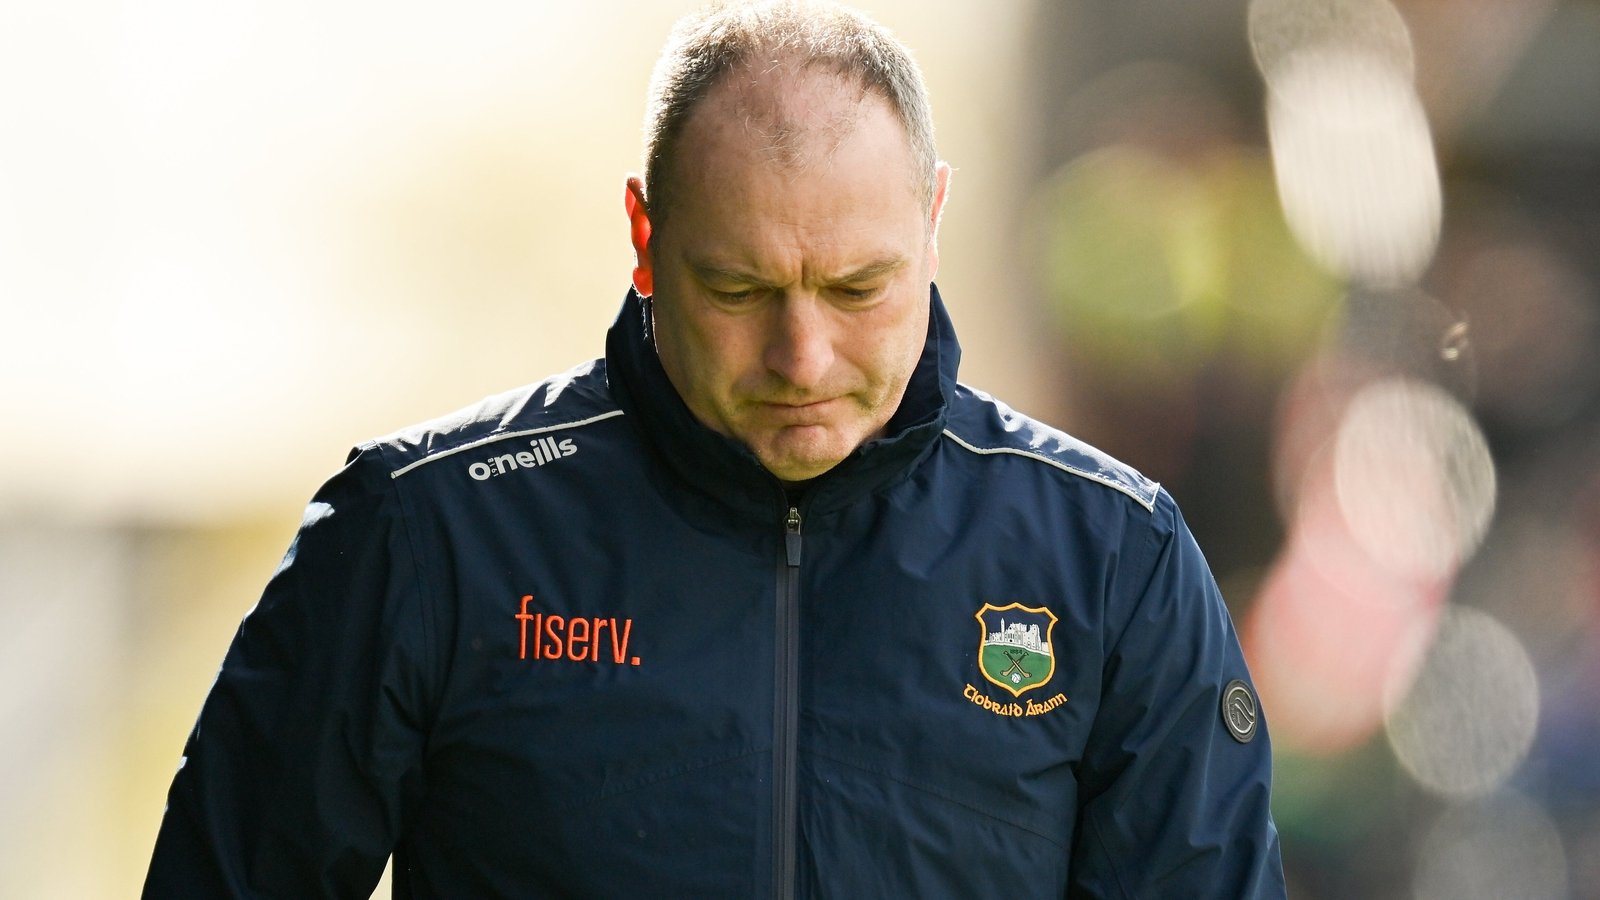 Hurling teams: No changes for Tipperary or Waterford